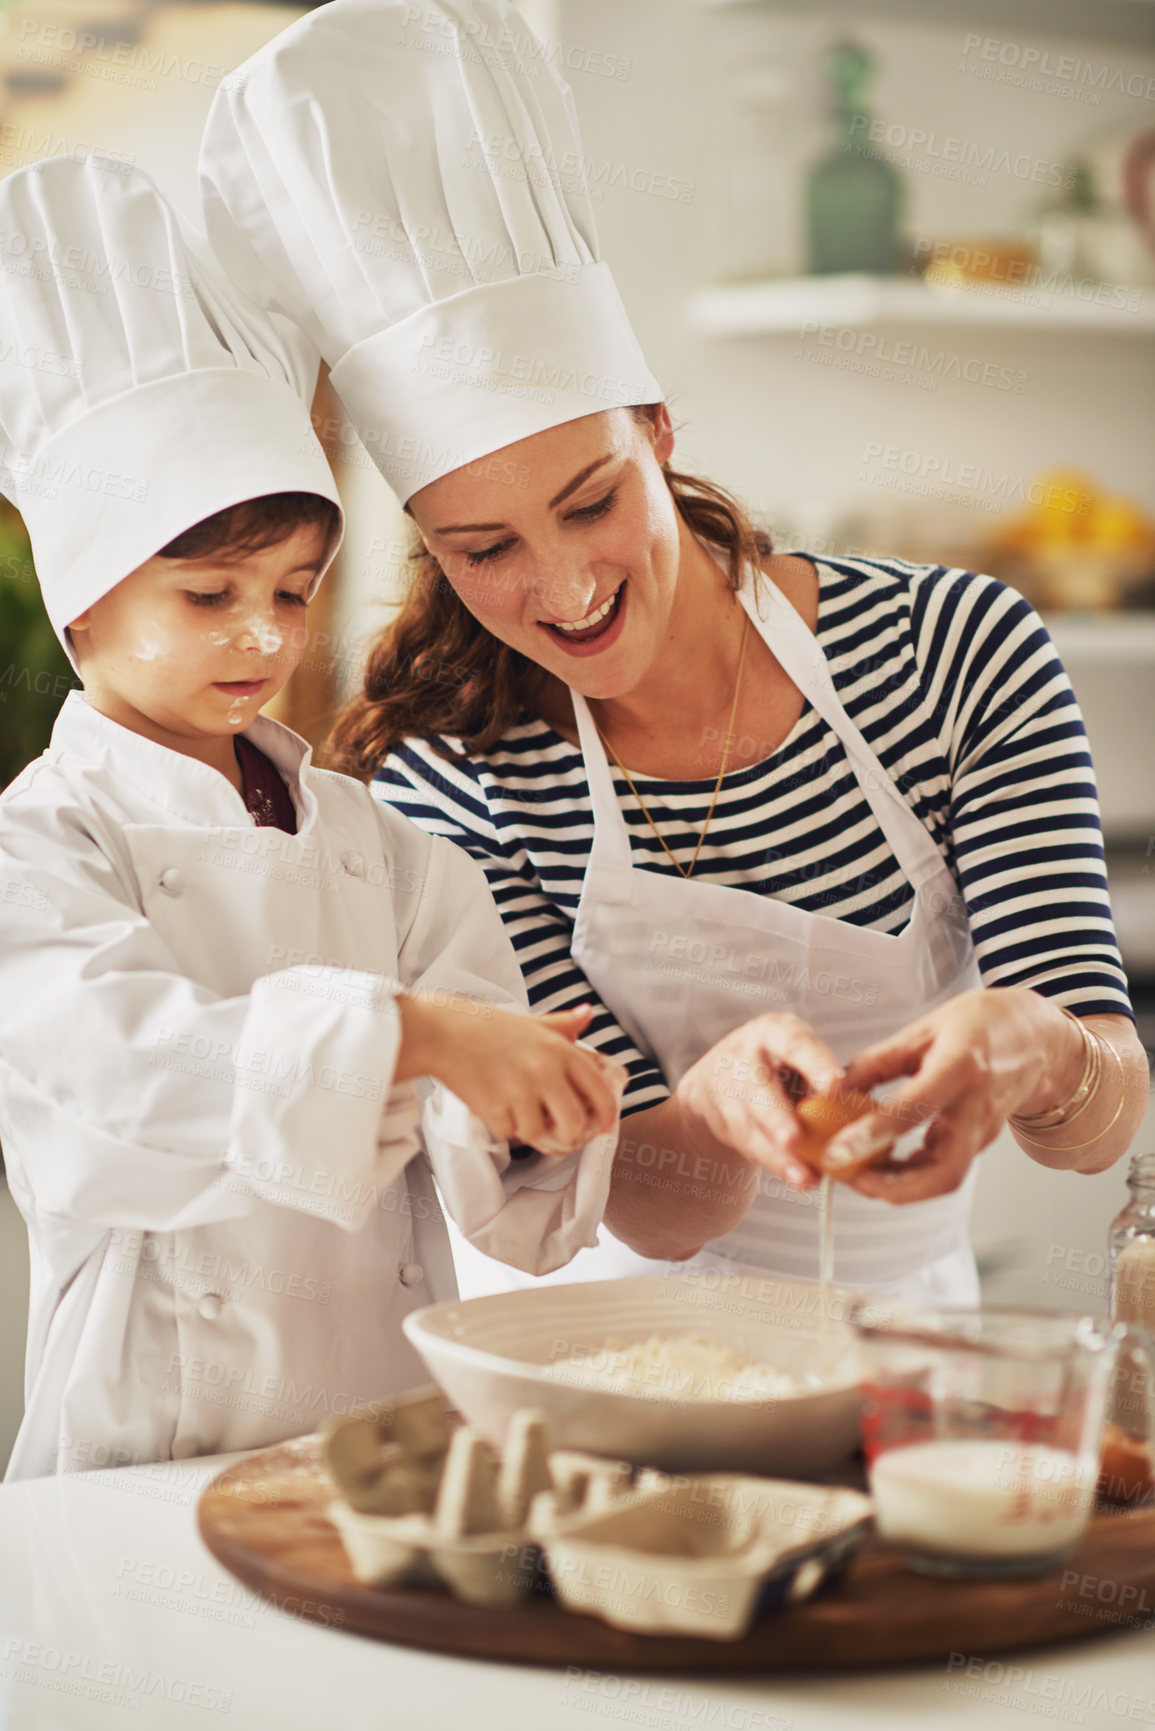 Buy stock photo Shot of a mother and her young son baking together in the kitchen